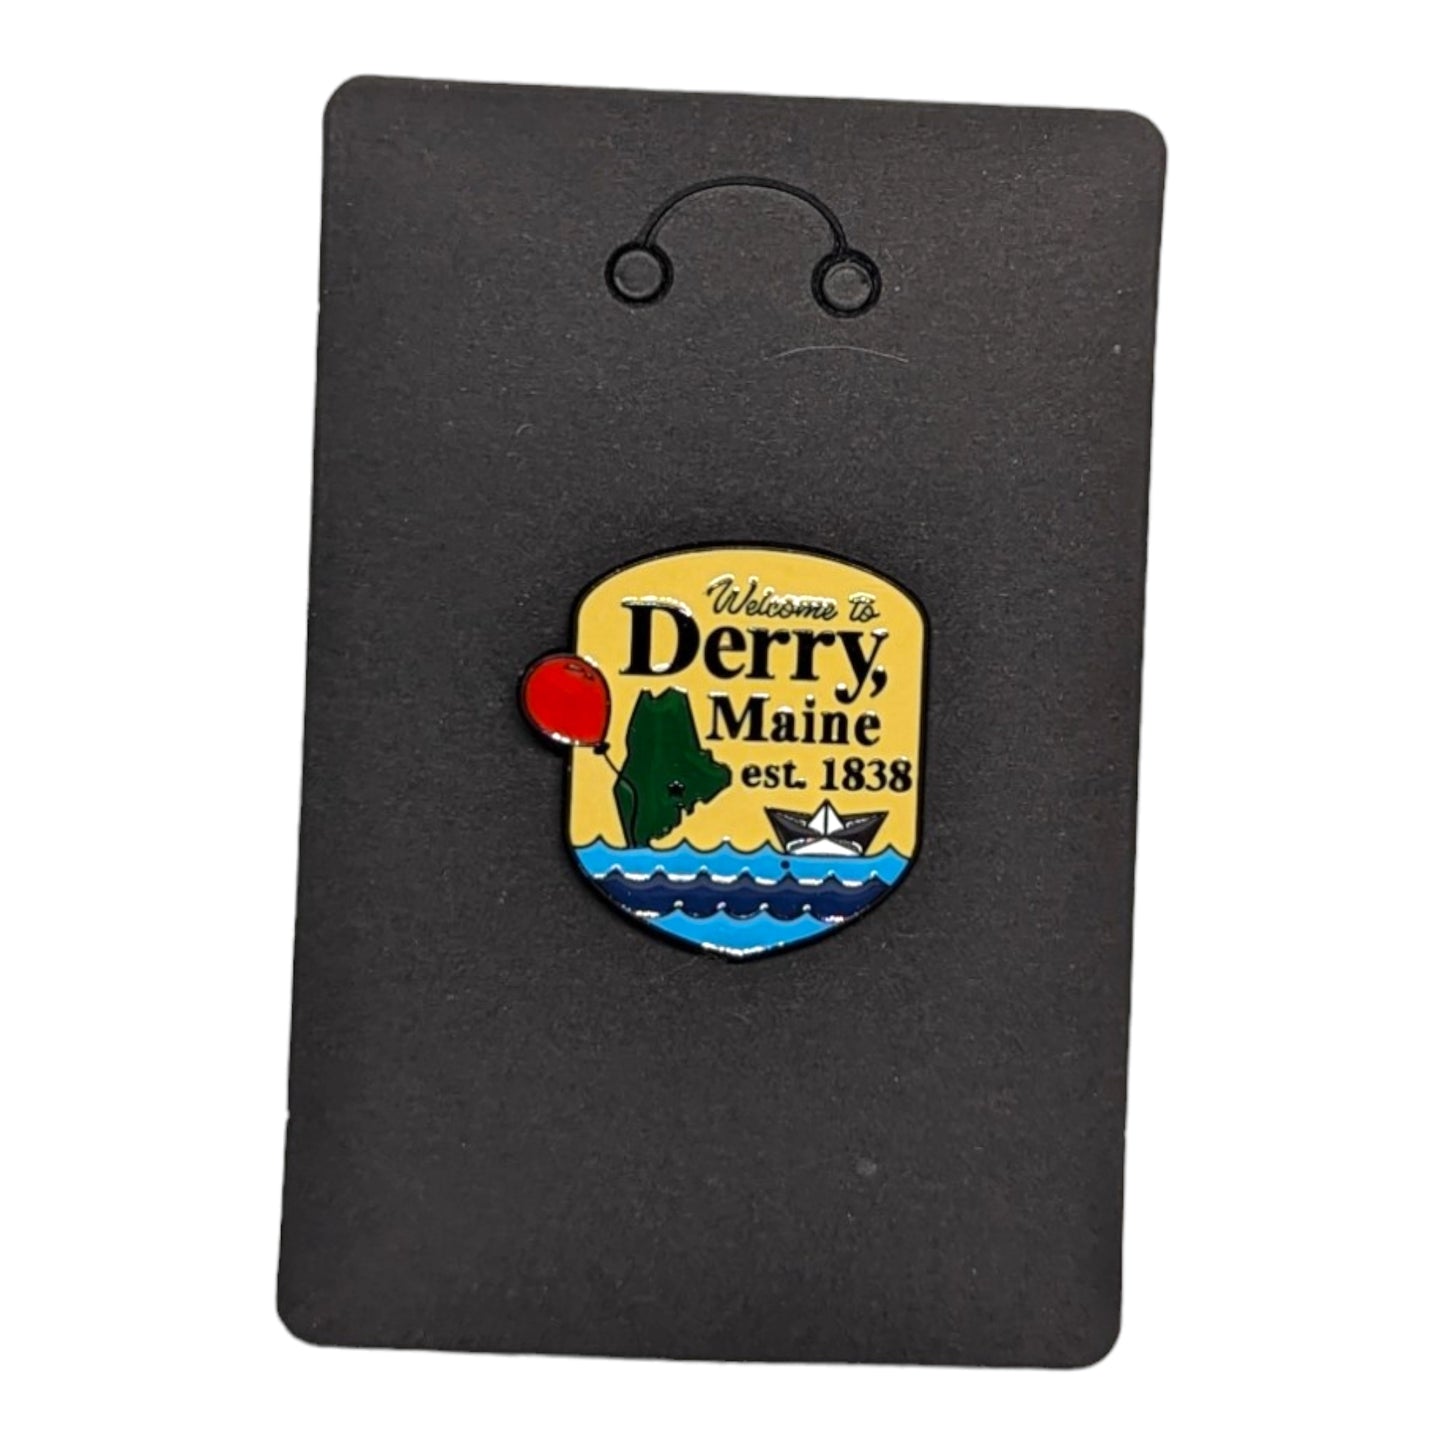 Welcome to Derry, Maine Est. 1838 Enamel Pin #205